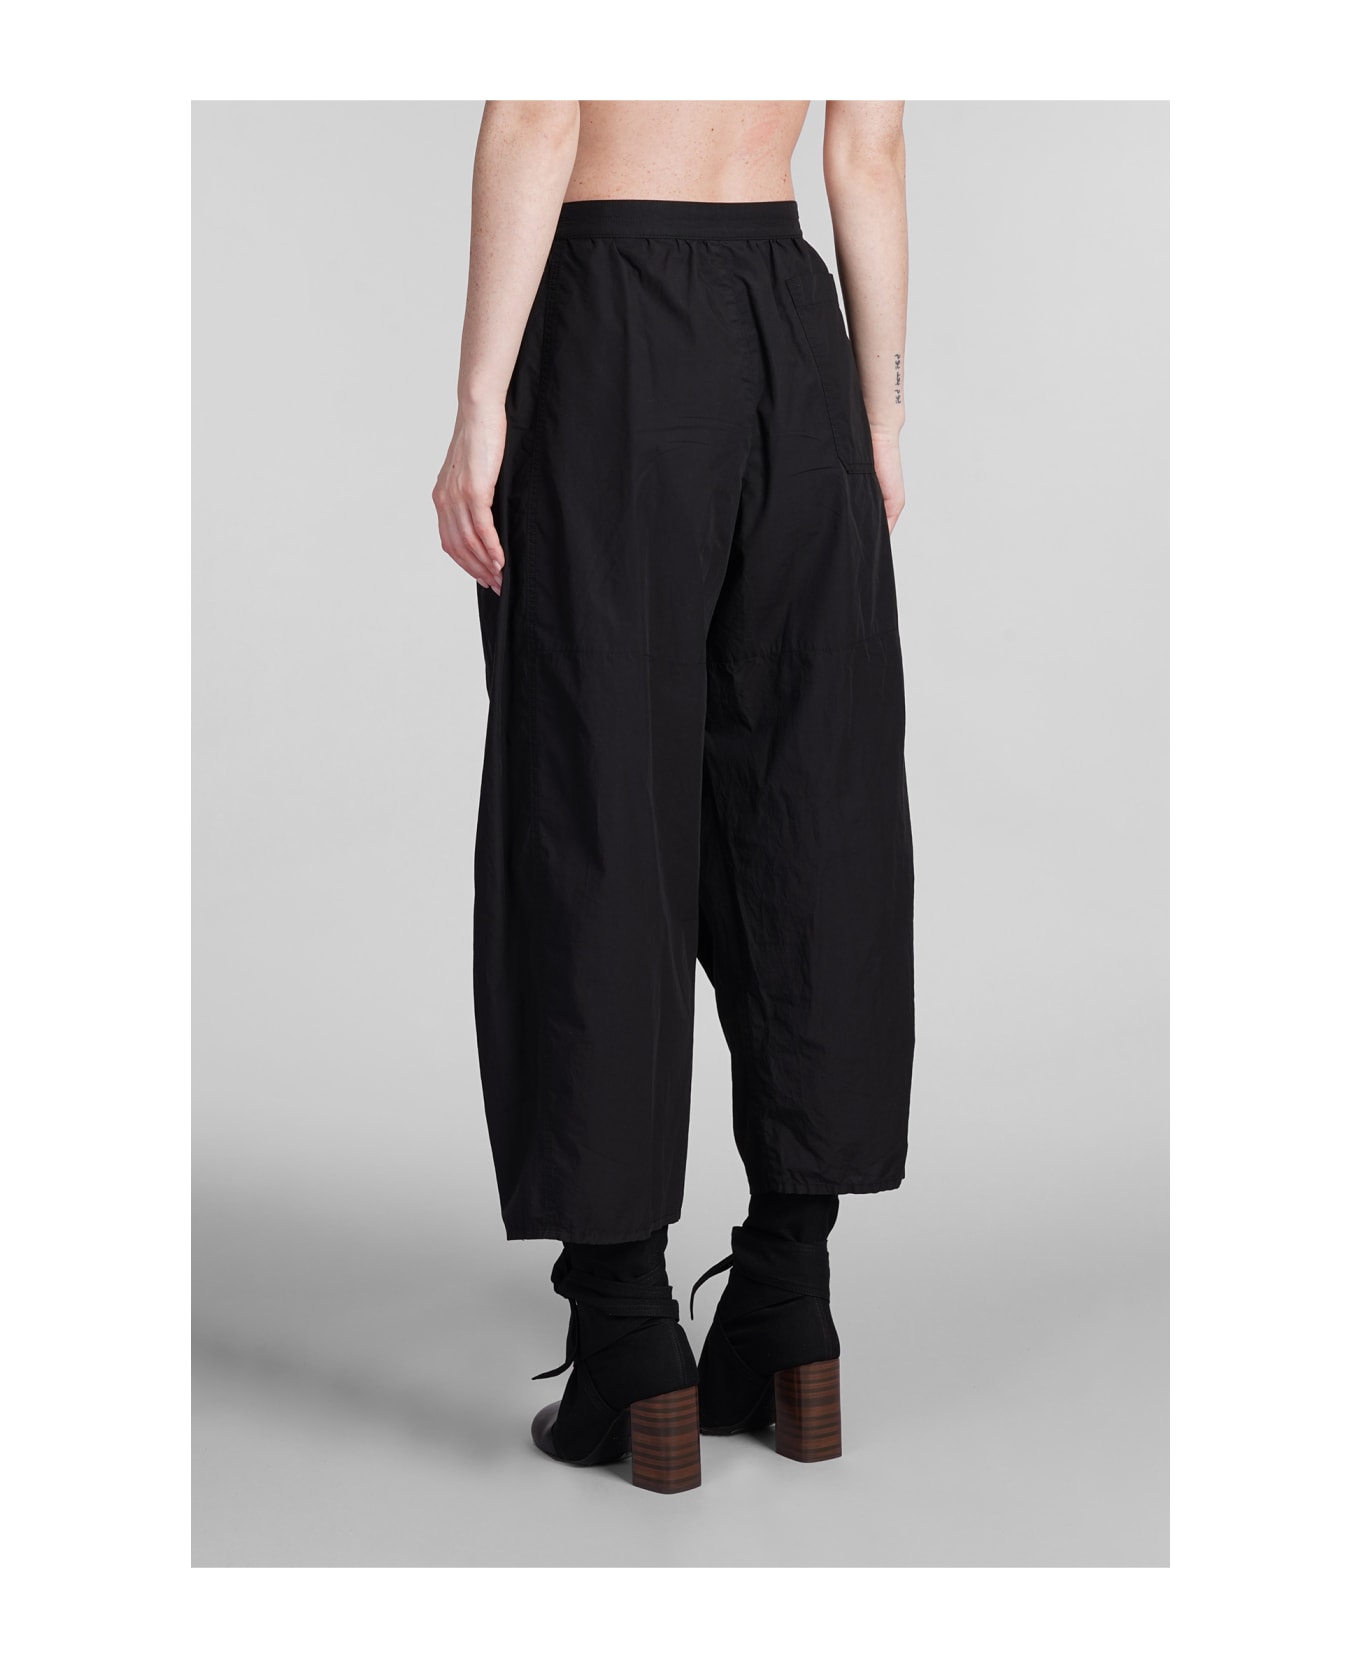 Lemaire Pants In Black Cotton - black ボトムス